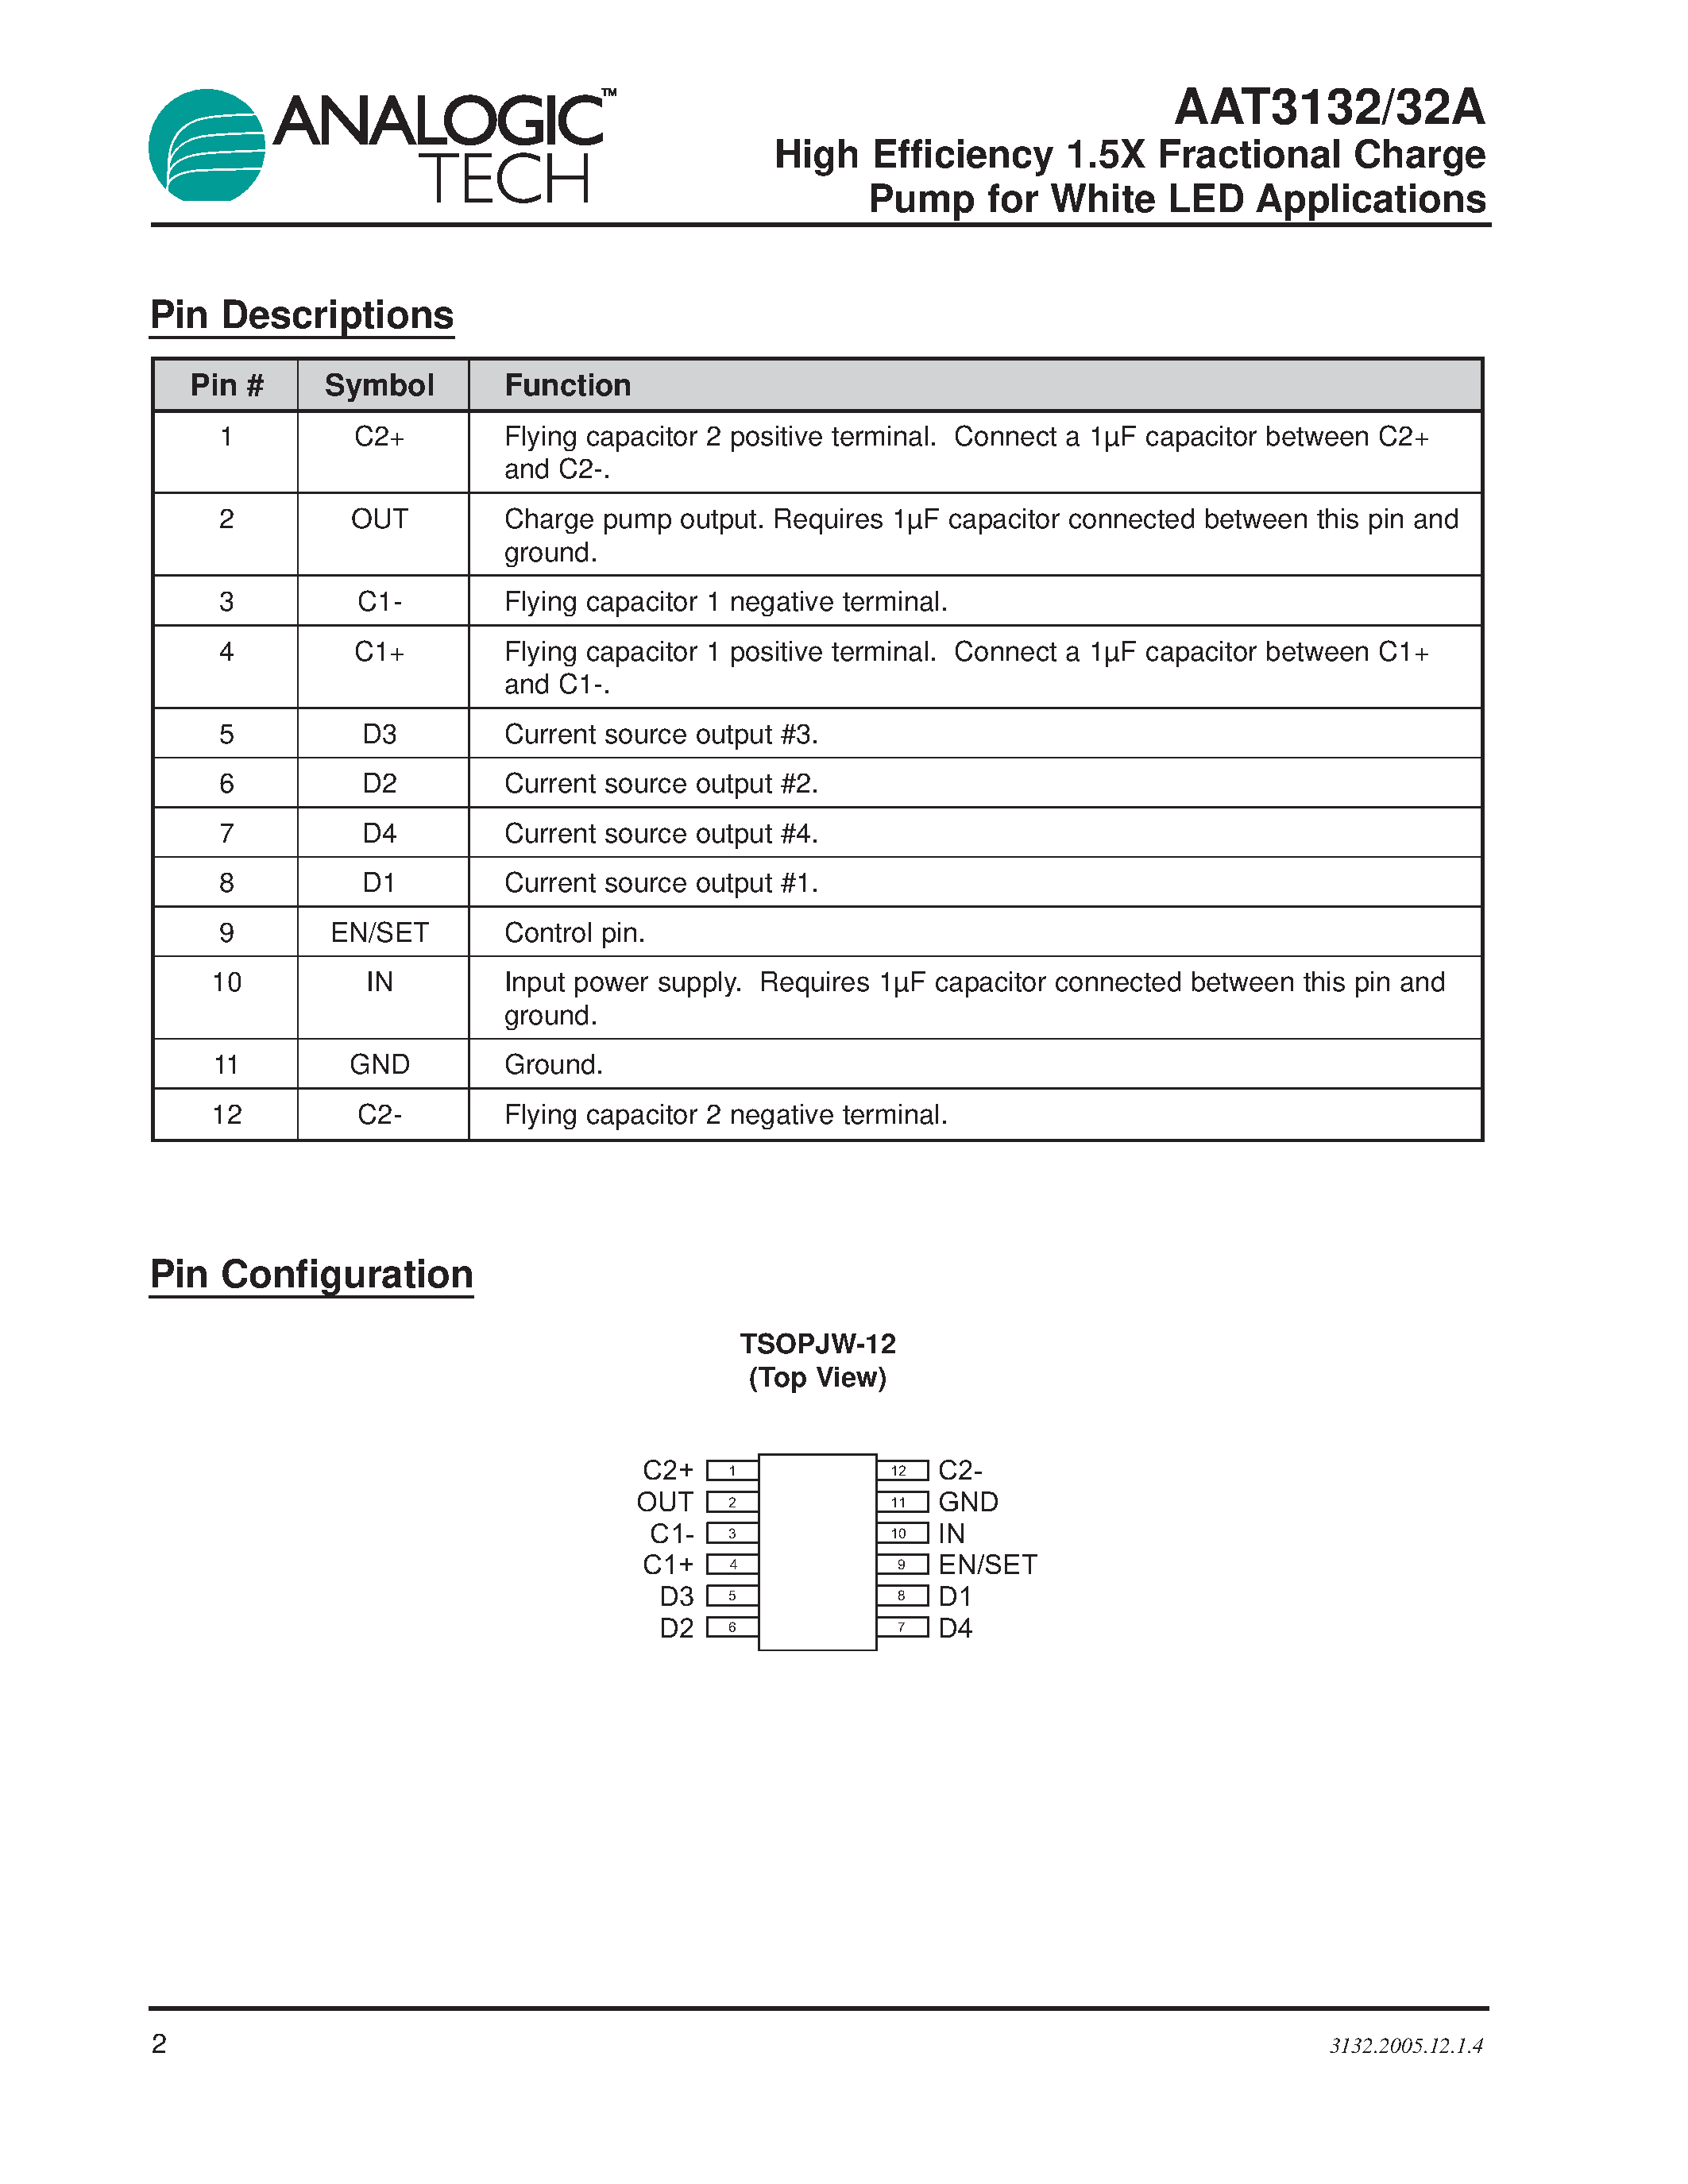 Datasheet AAT3132 - High Efficiency 1.5X Fractional Charge Pump page 2